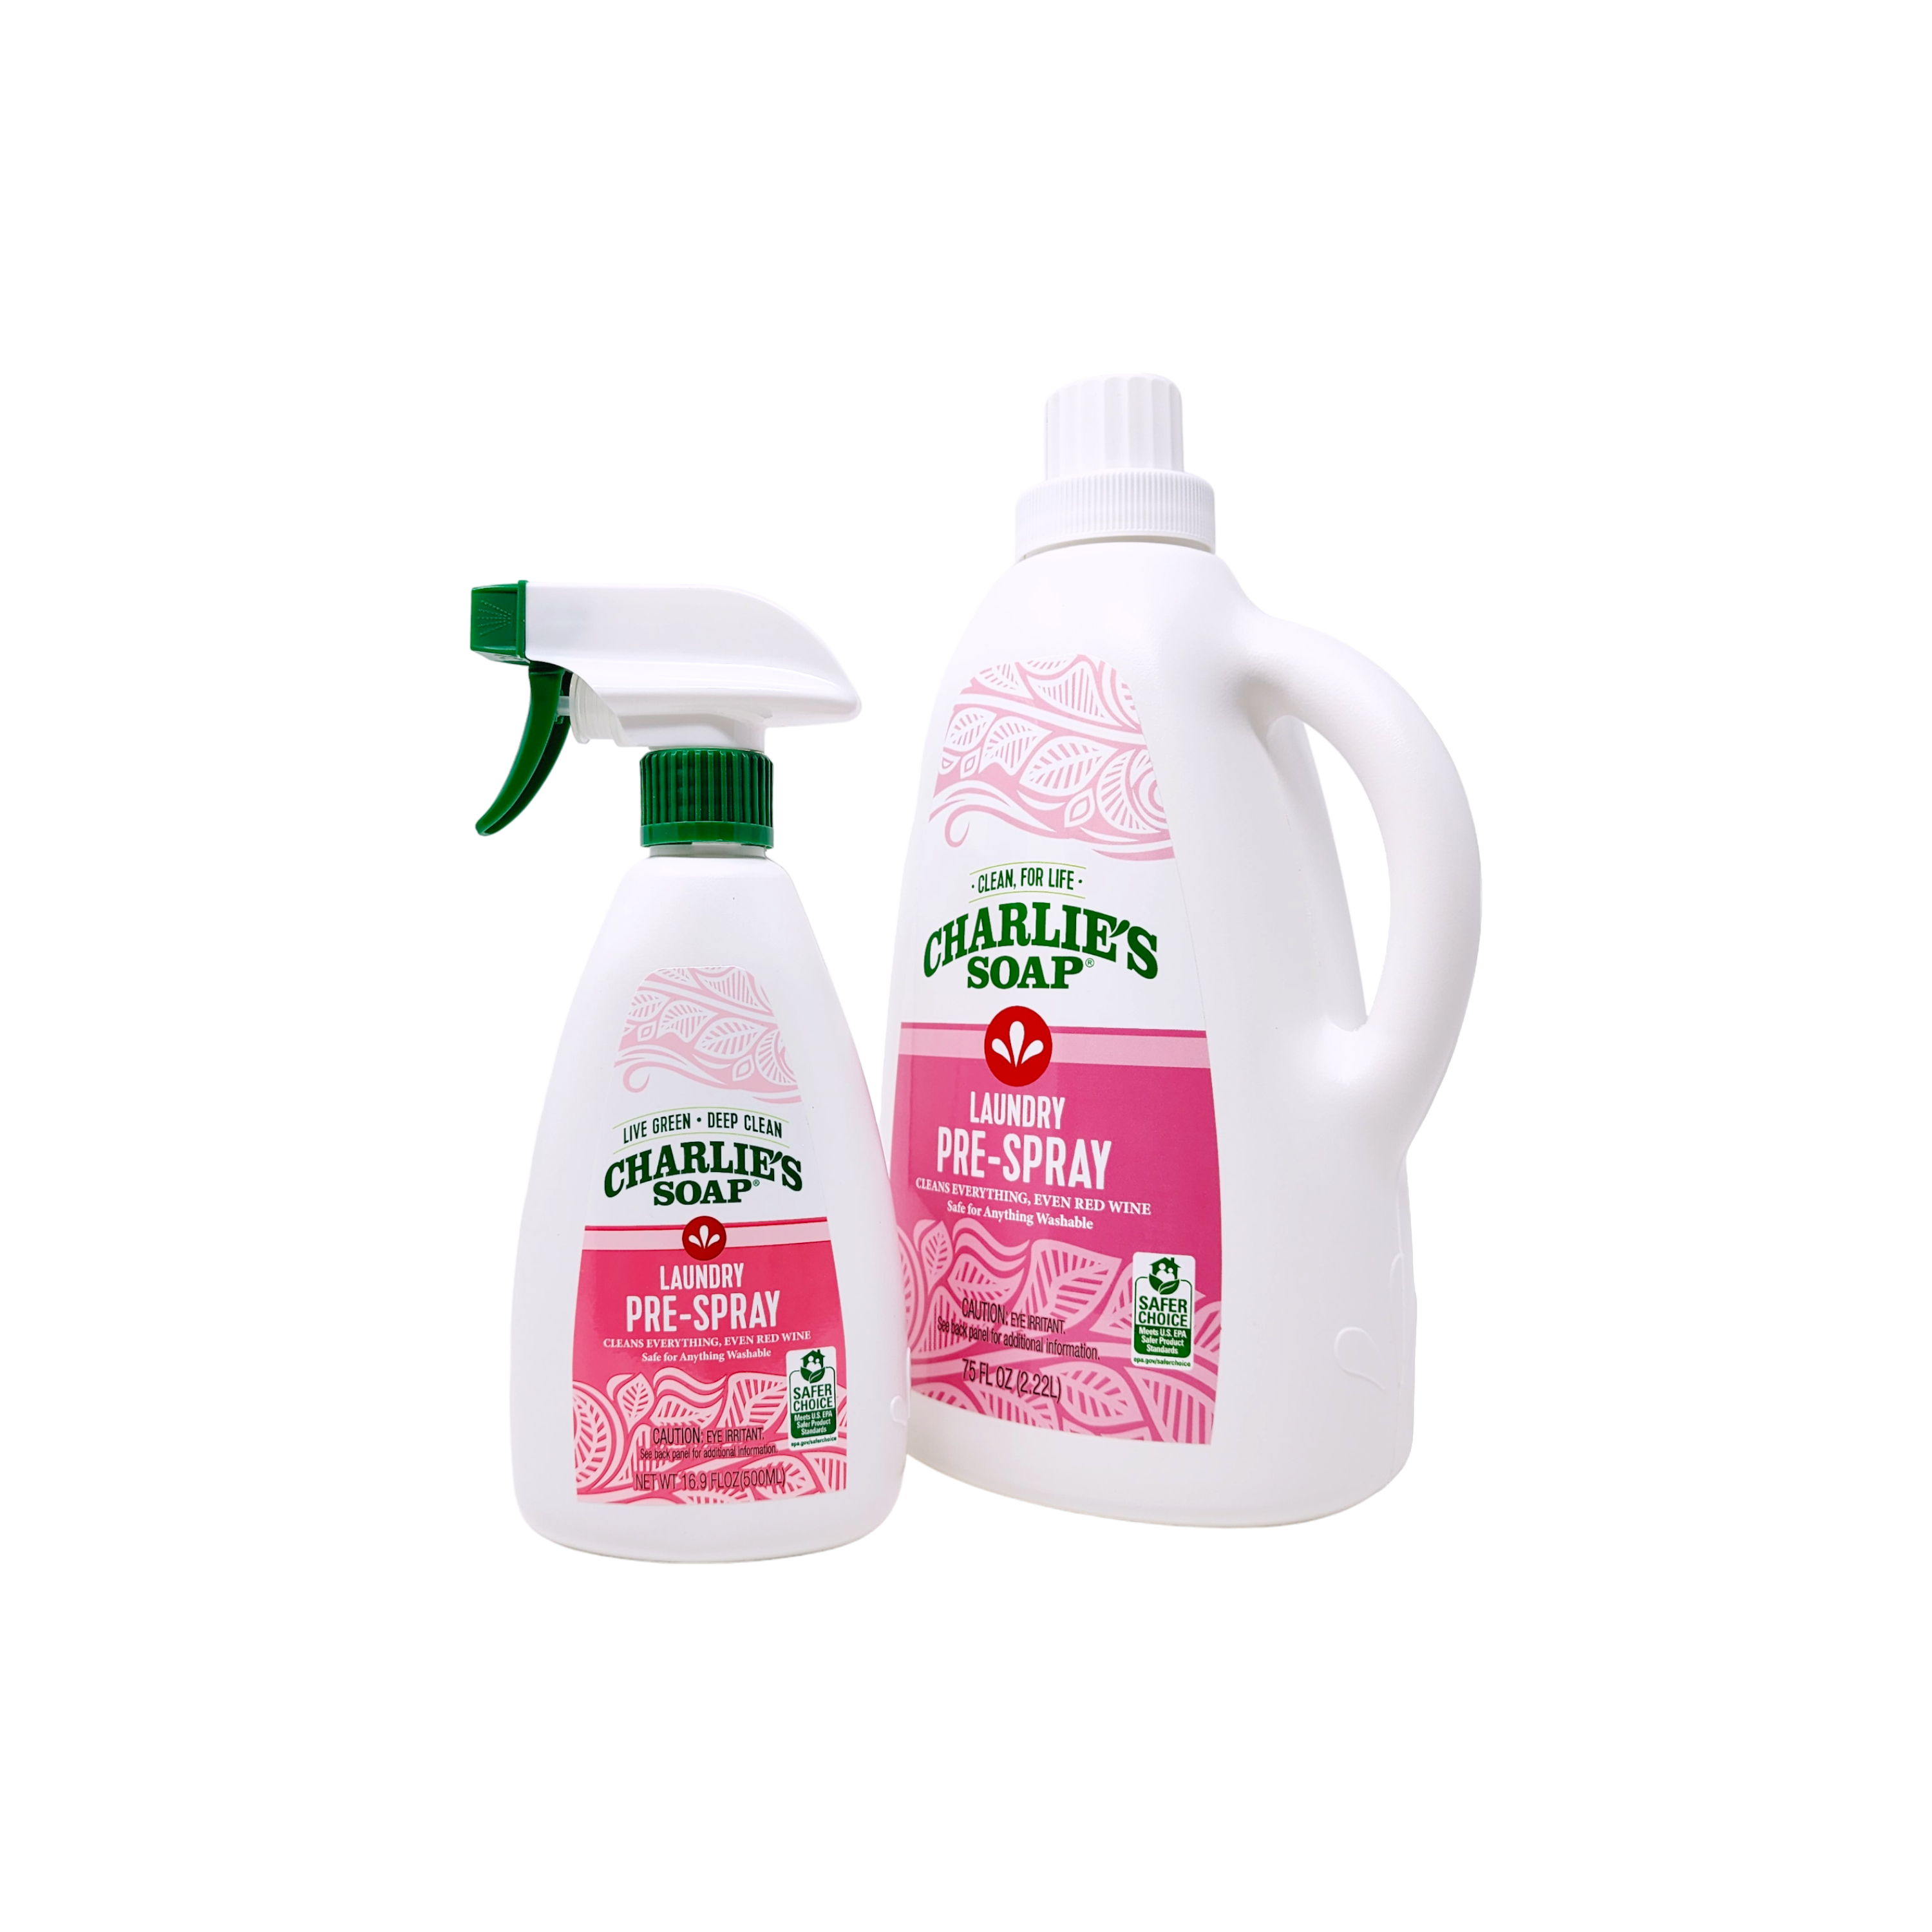 1001 Heavy Duty Degreaser - Biodegradable Concentrated All Purpose Water  Based Degreaser